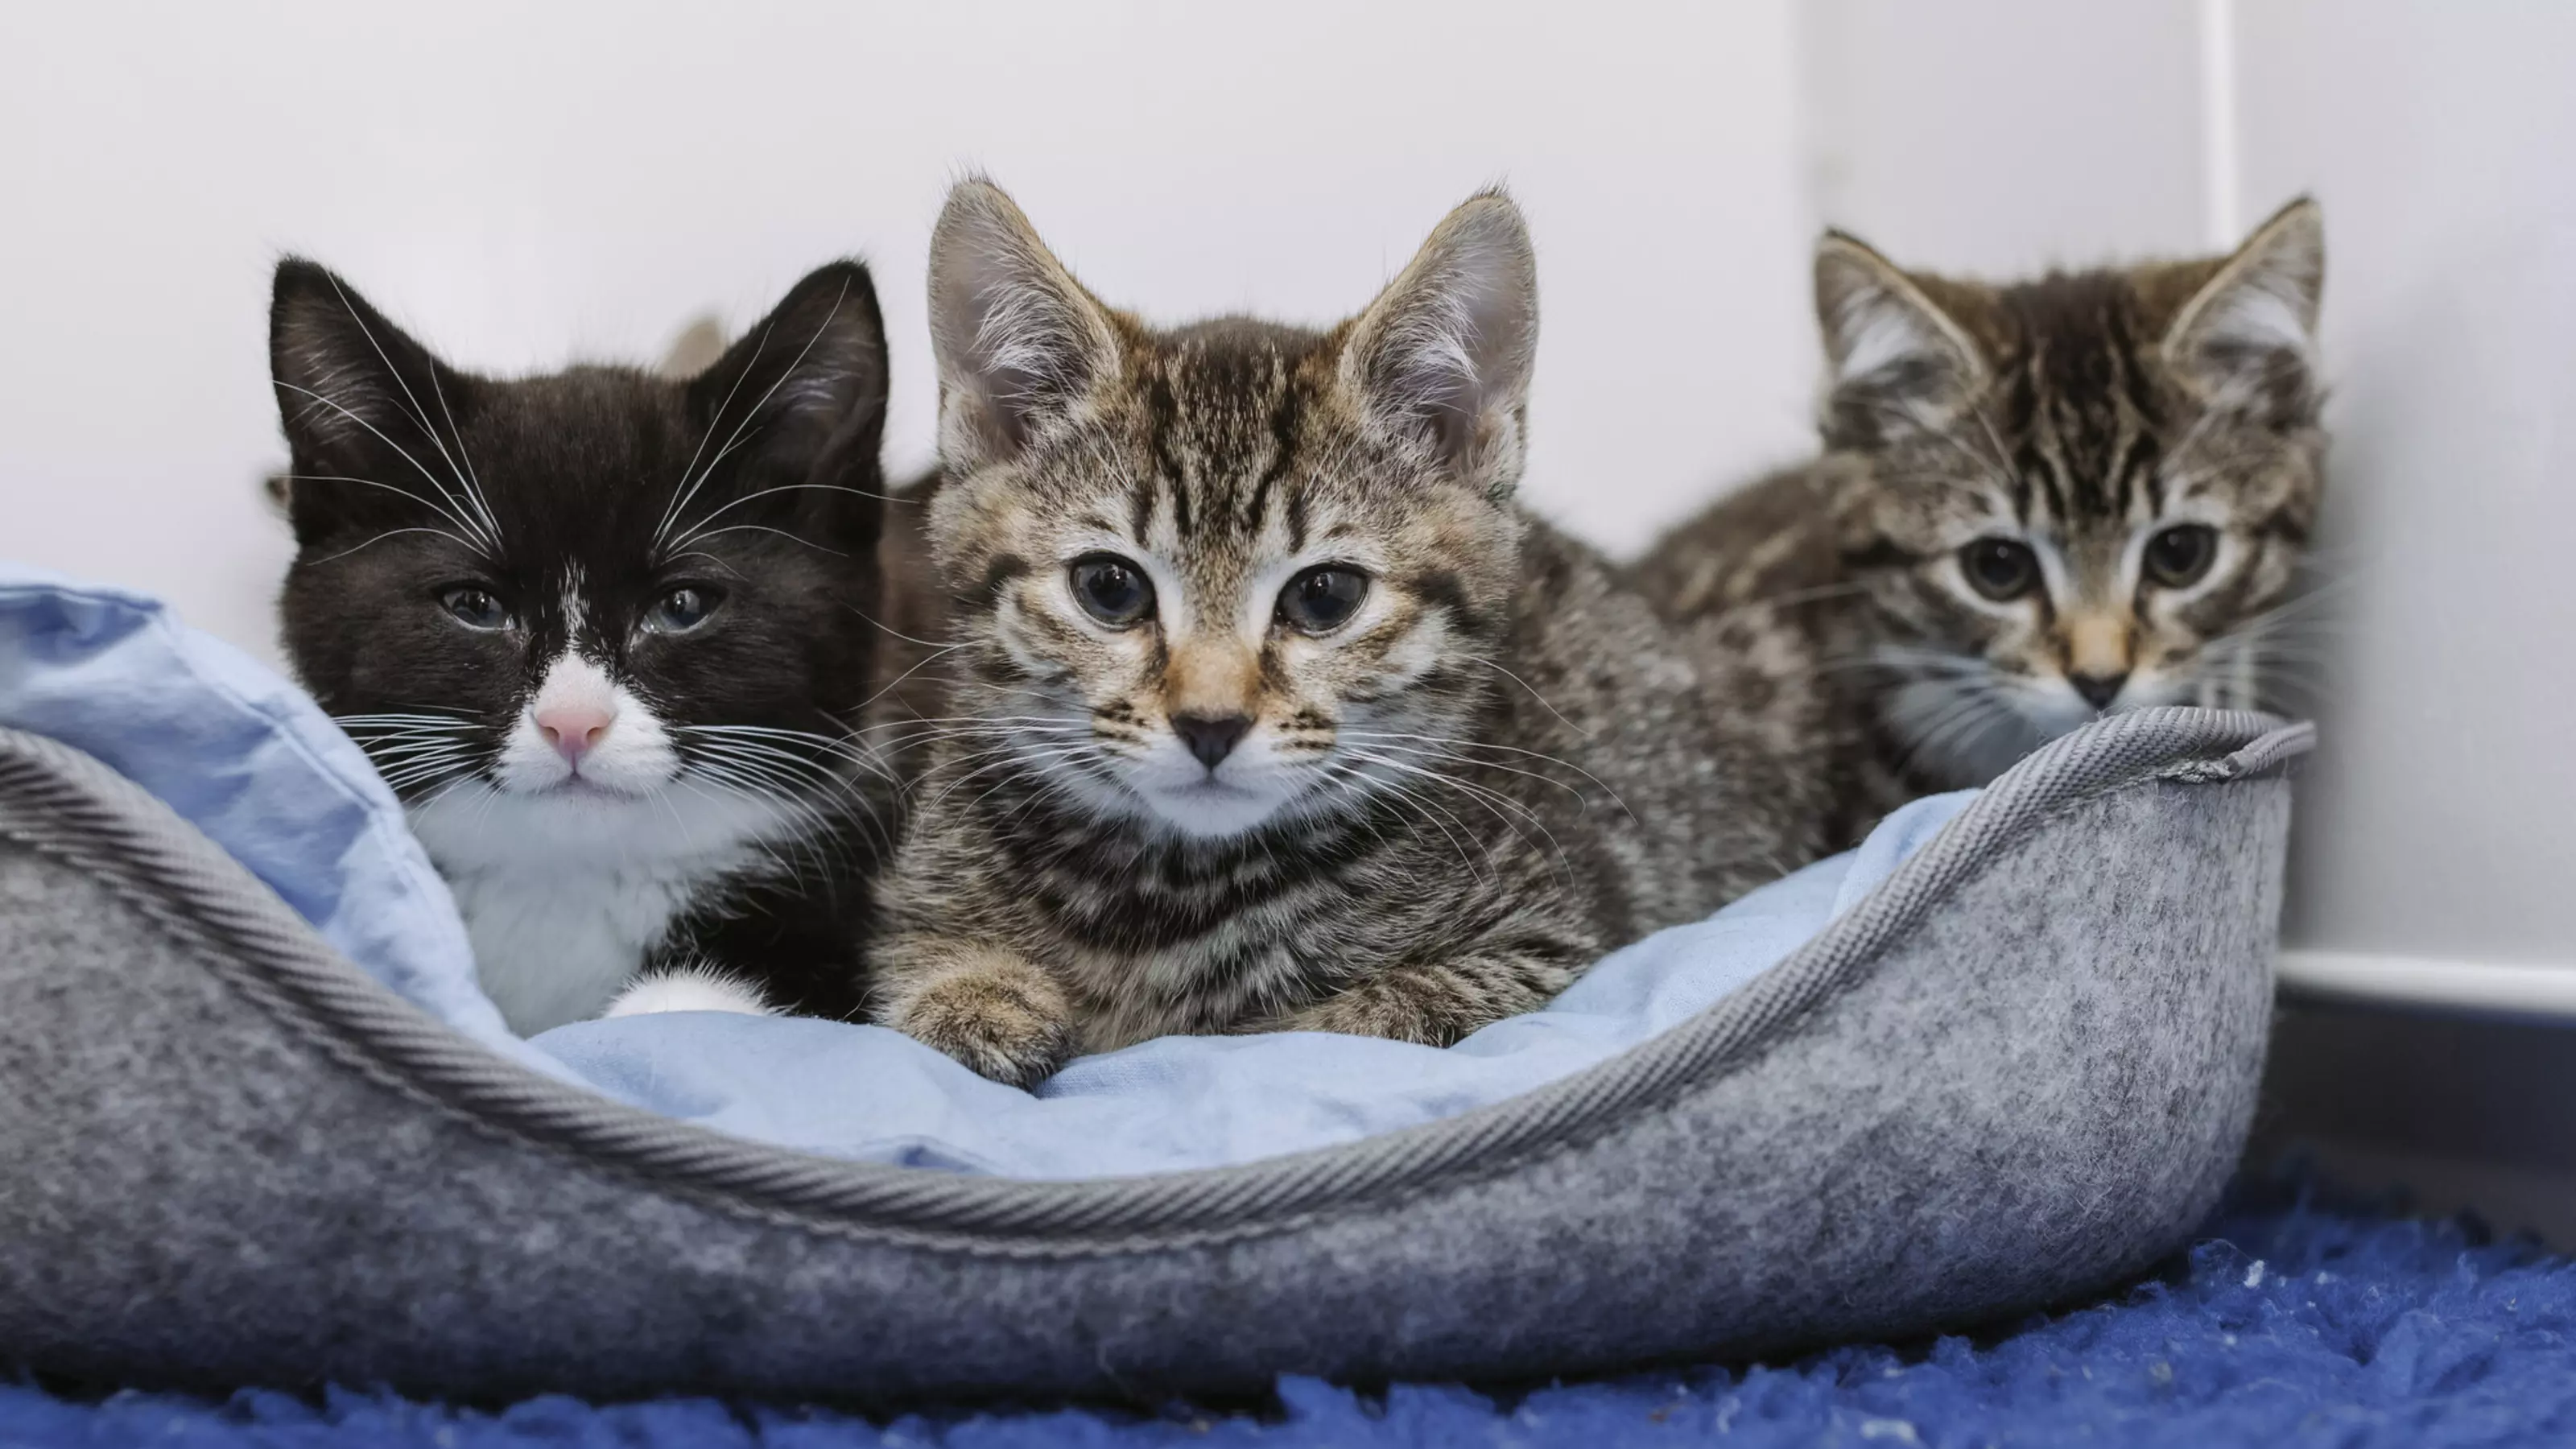 Three of the kittens lying in a blue and grey bed looking to camera